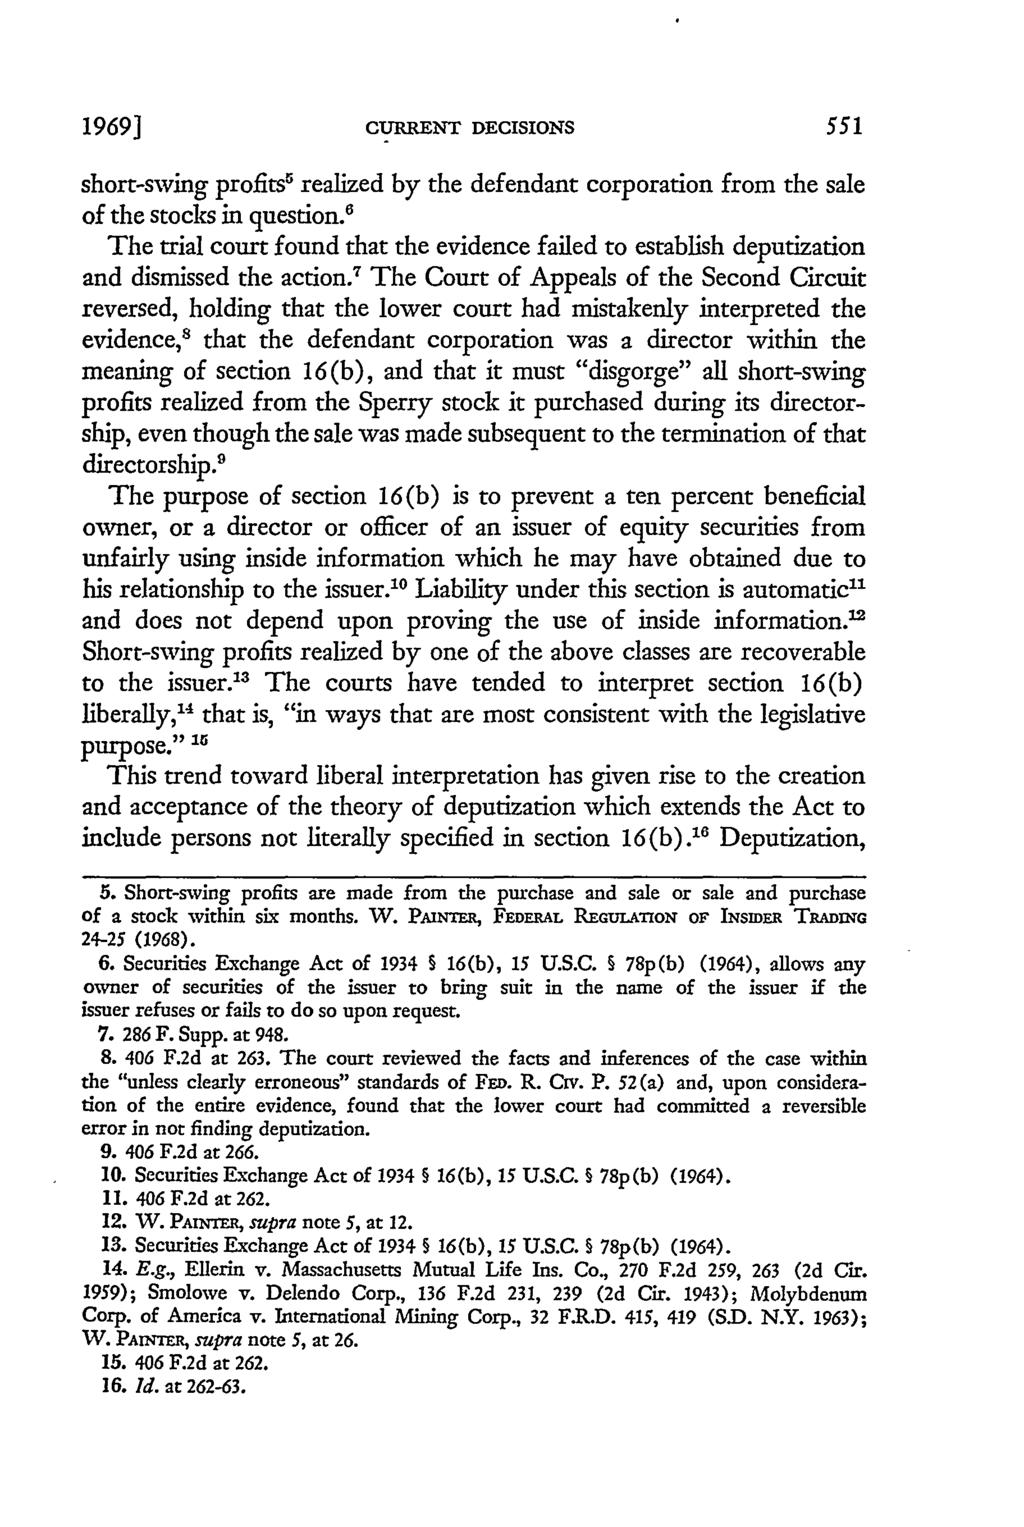 1969] CURRENT DECISIONS short-swing profits 5 realized by the defendant corporation from the sale of the stocks in question.